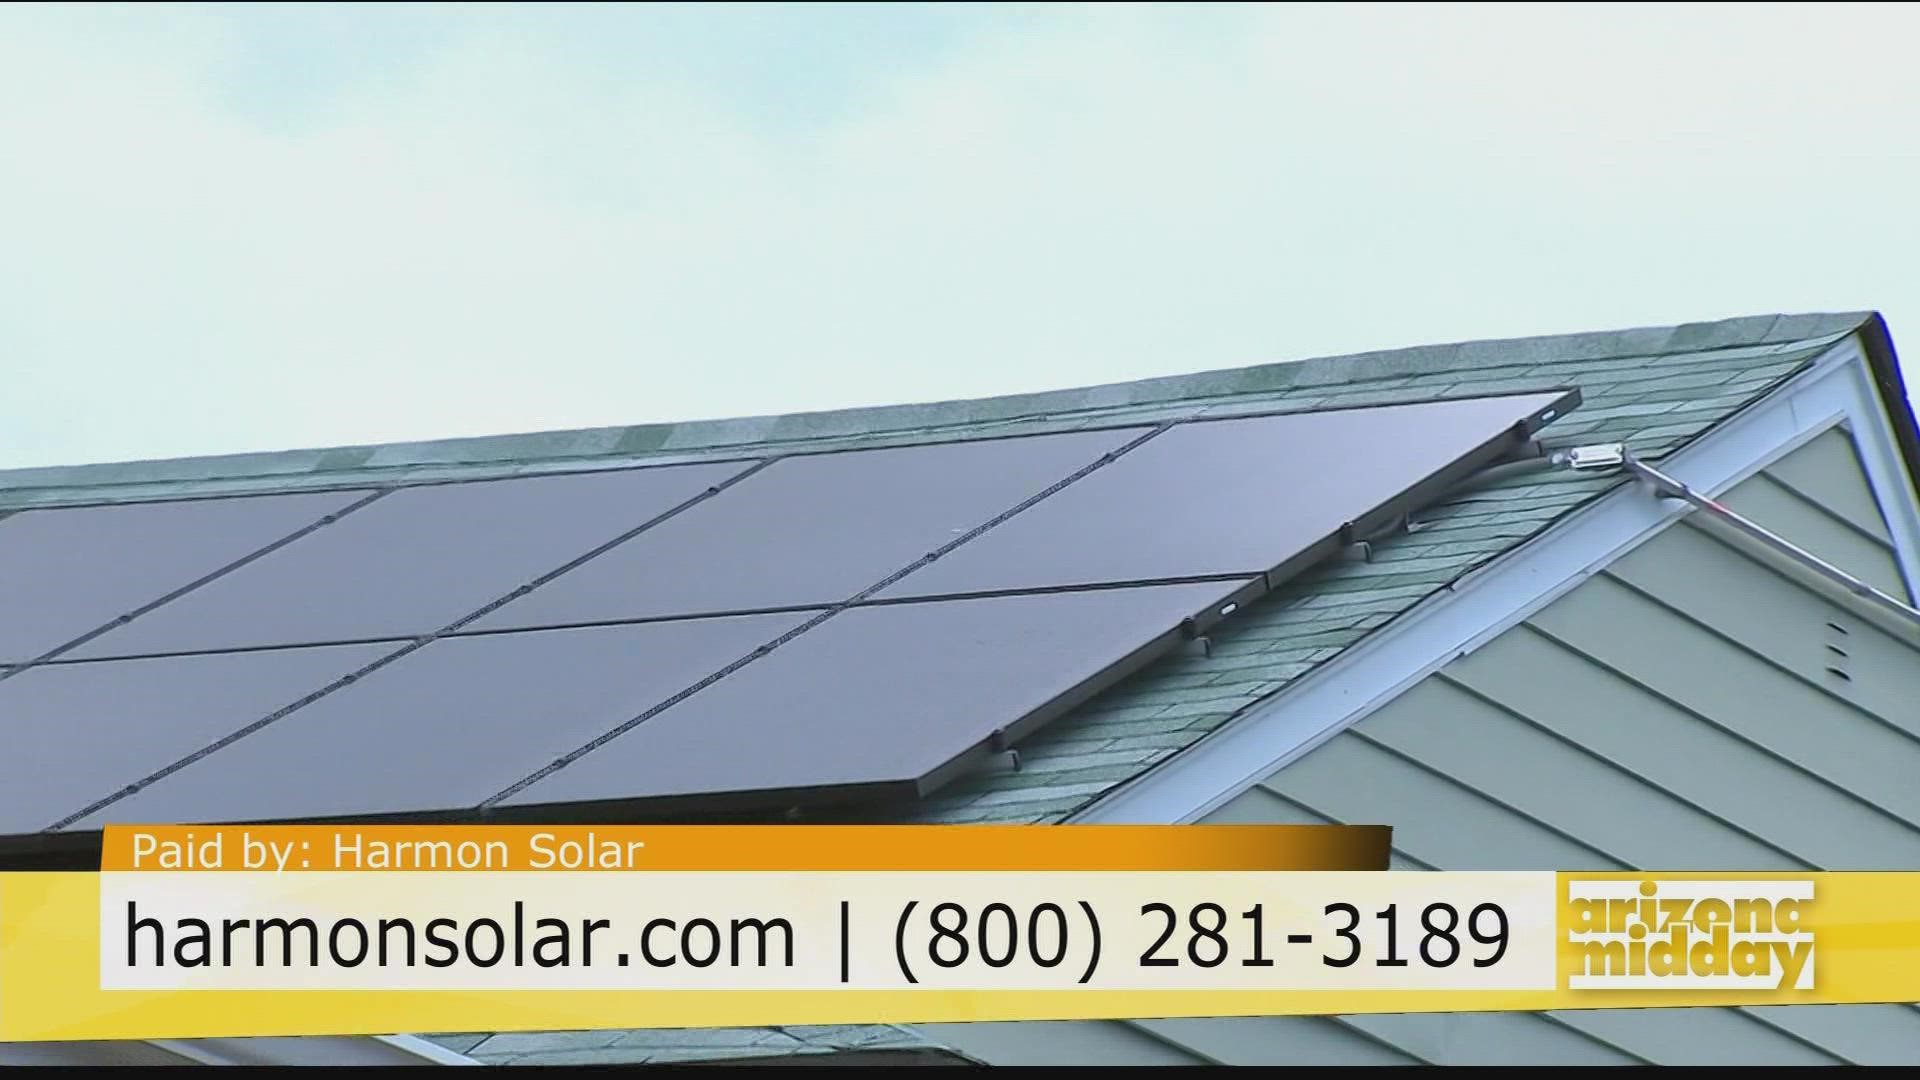 Got questions about going solar? How to start the process to how to make money - Ralph Romano with Harmon Solar has your answers!